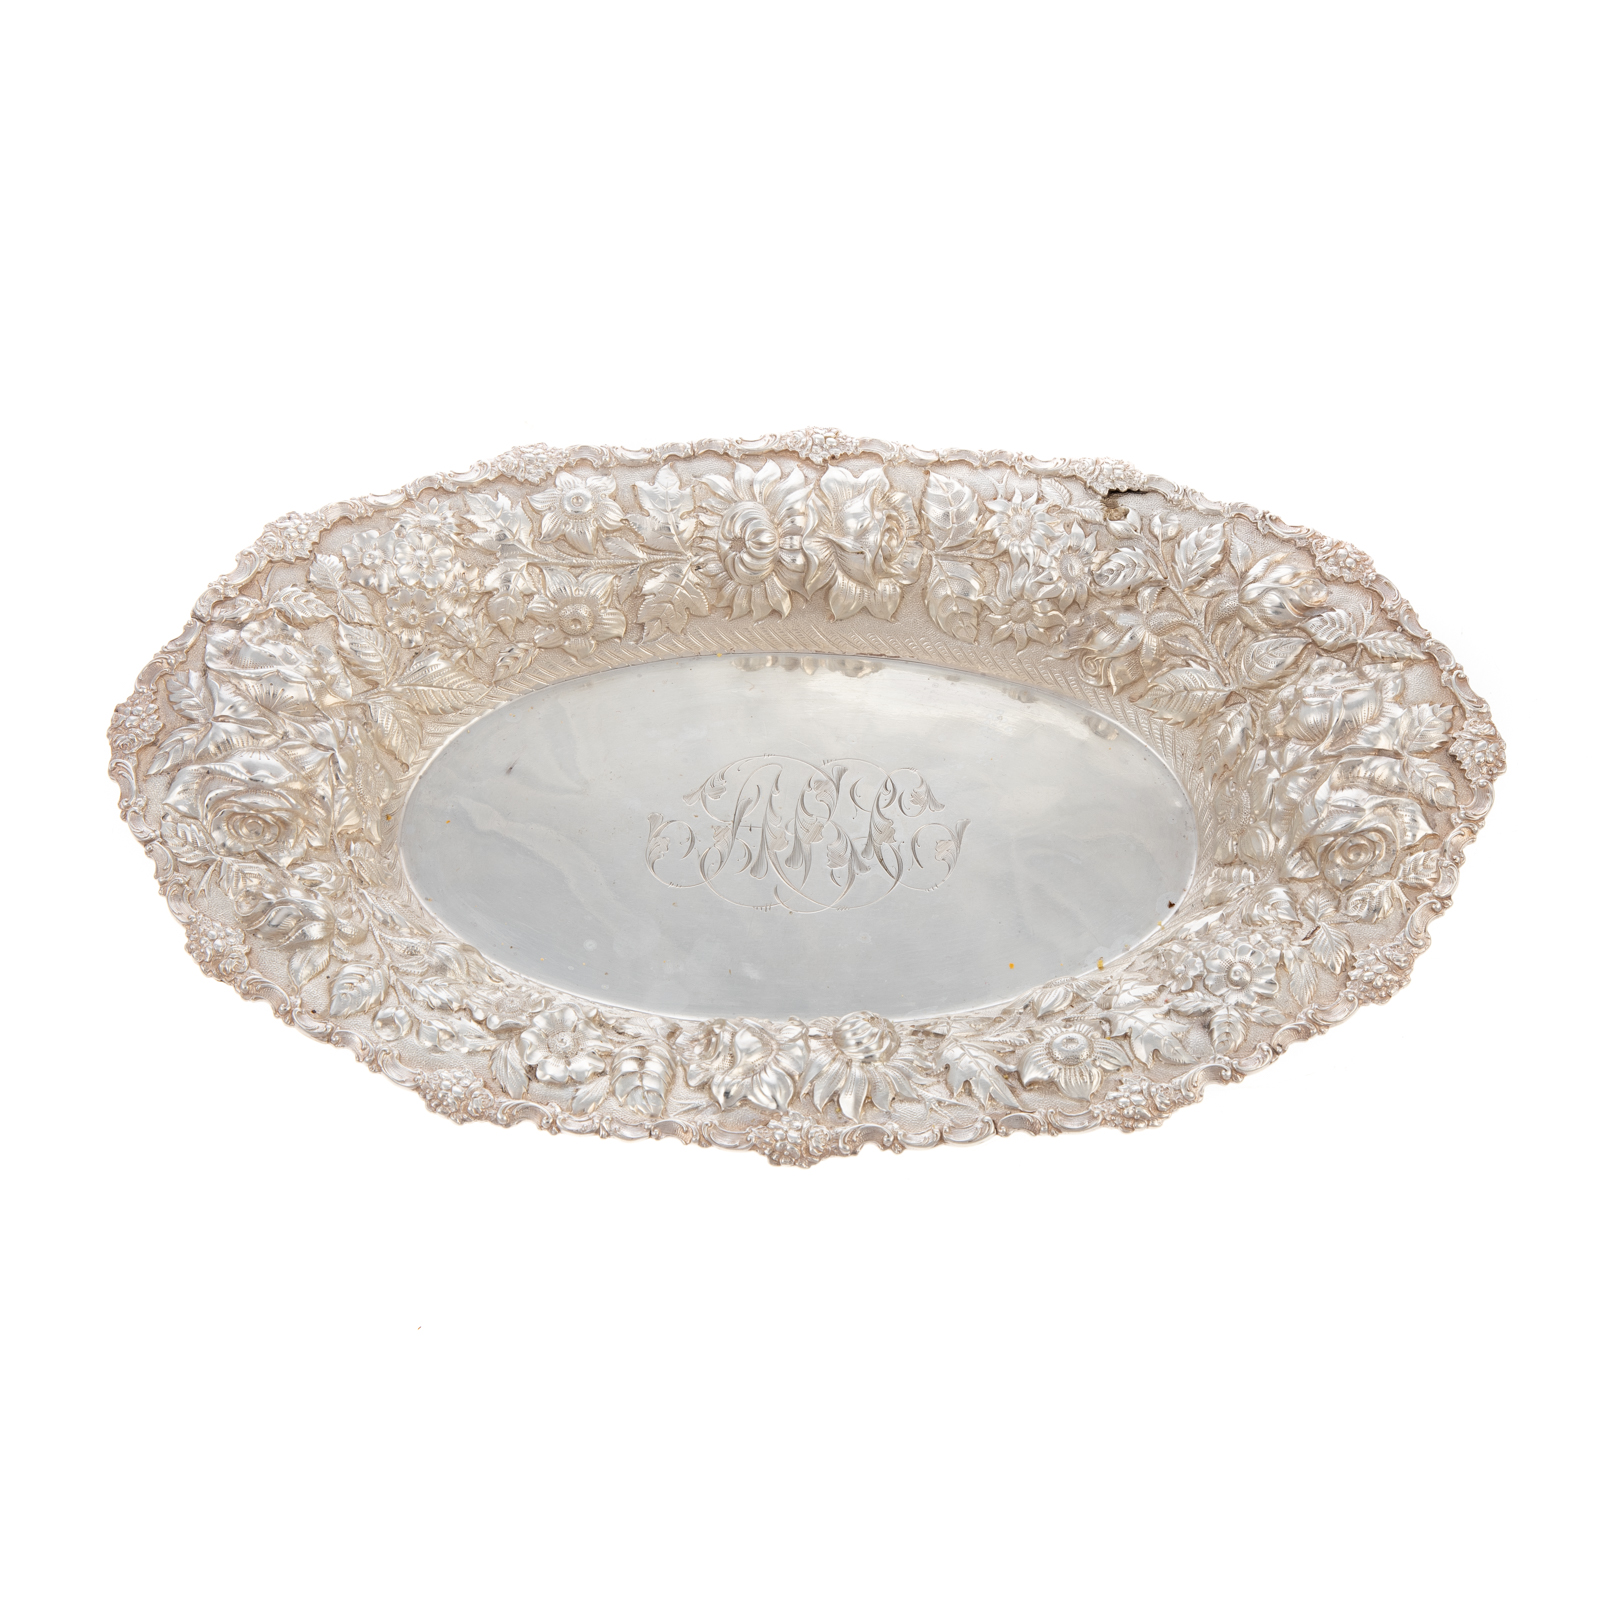 STIEFF STERLING REPOUSSE BREAD 338730